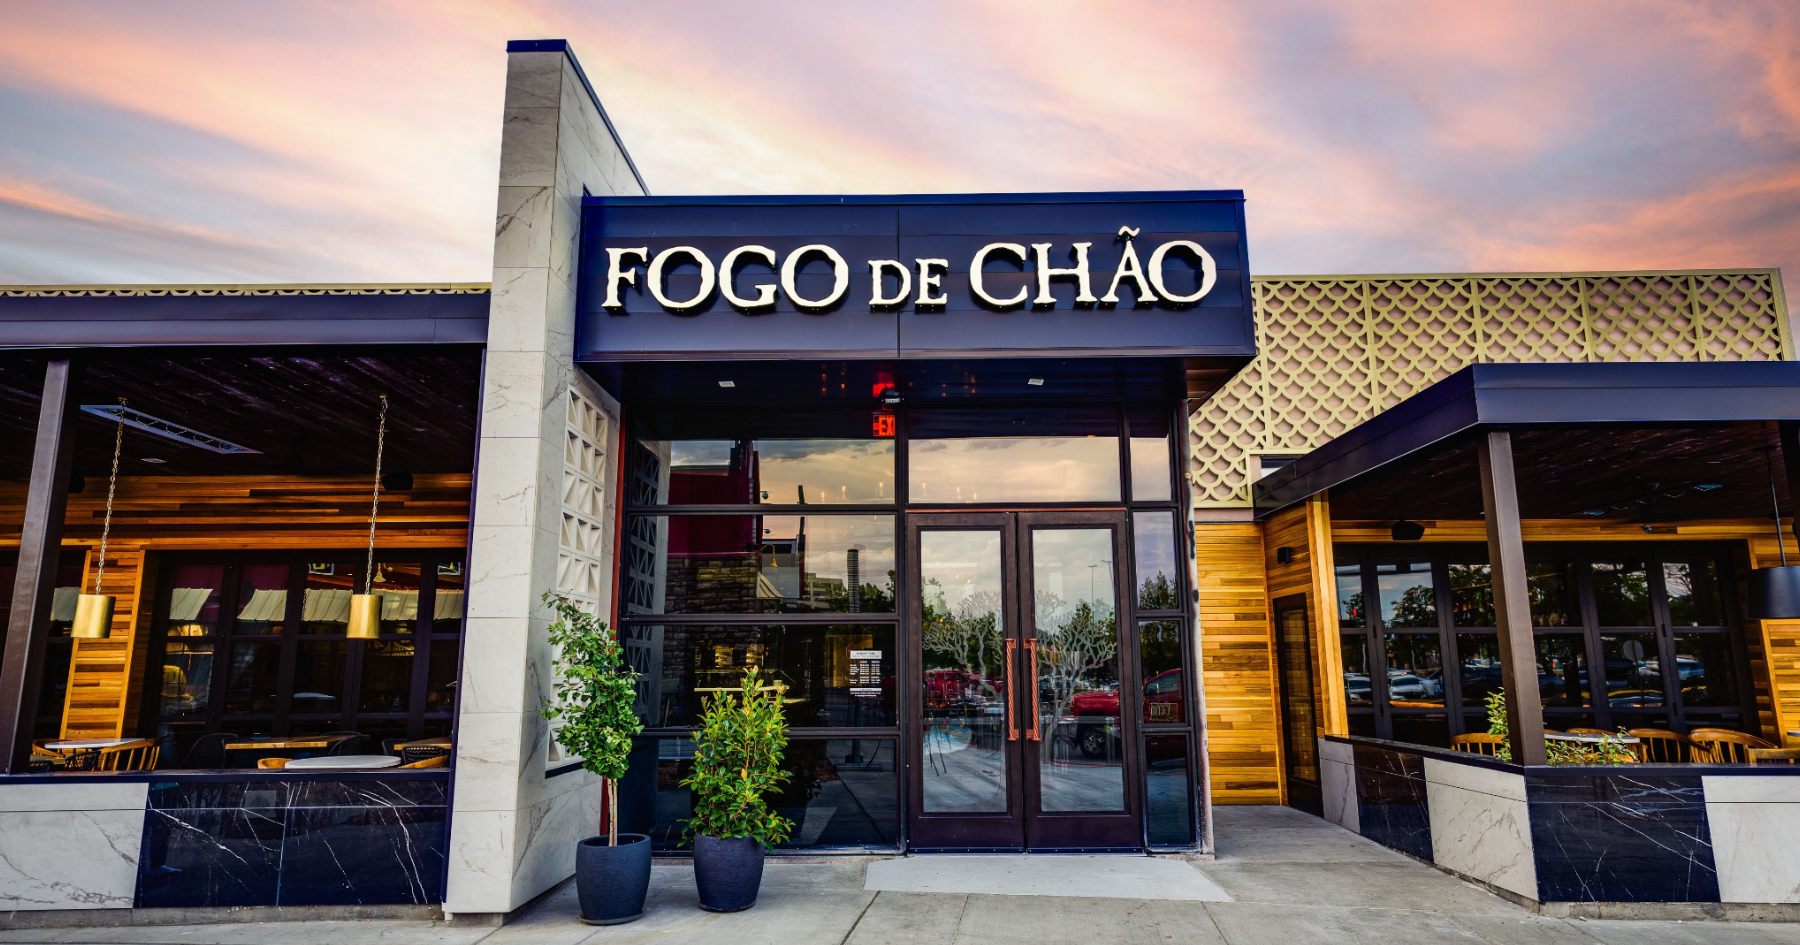 Fogo de Chao is not your average steakhouse